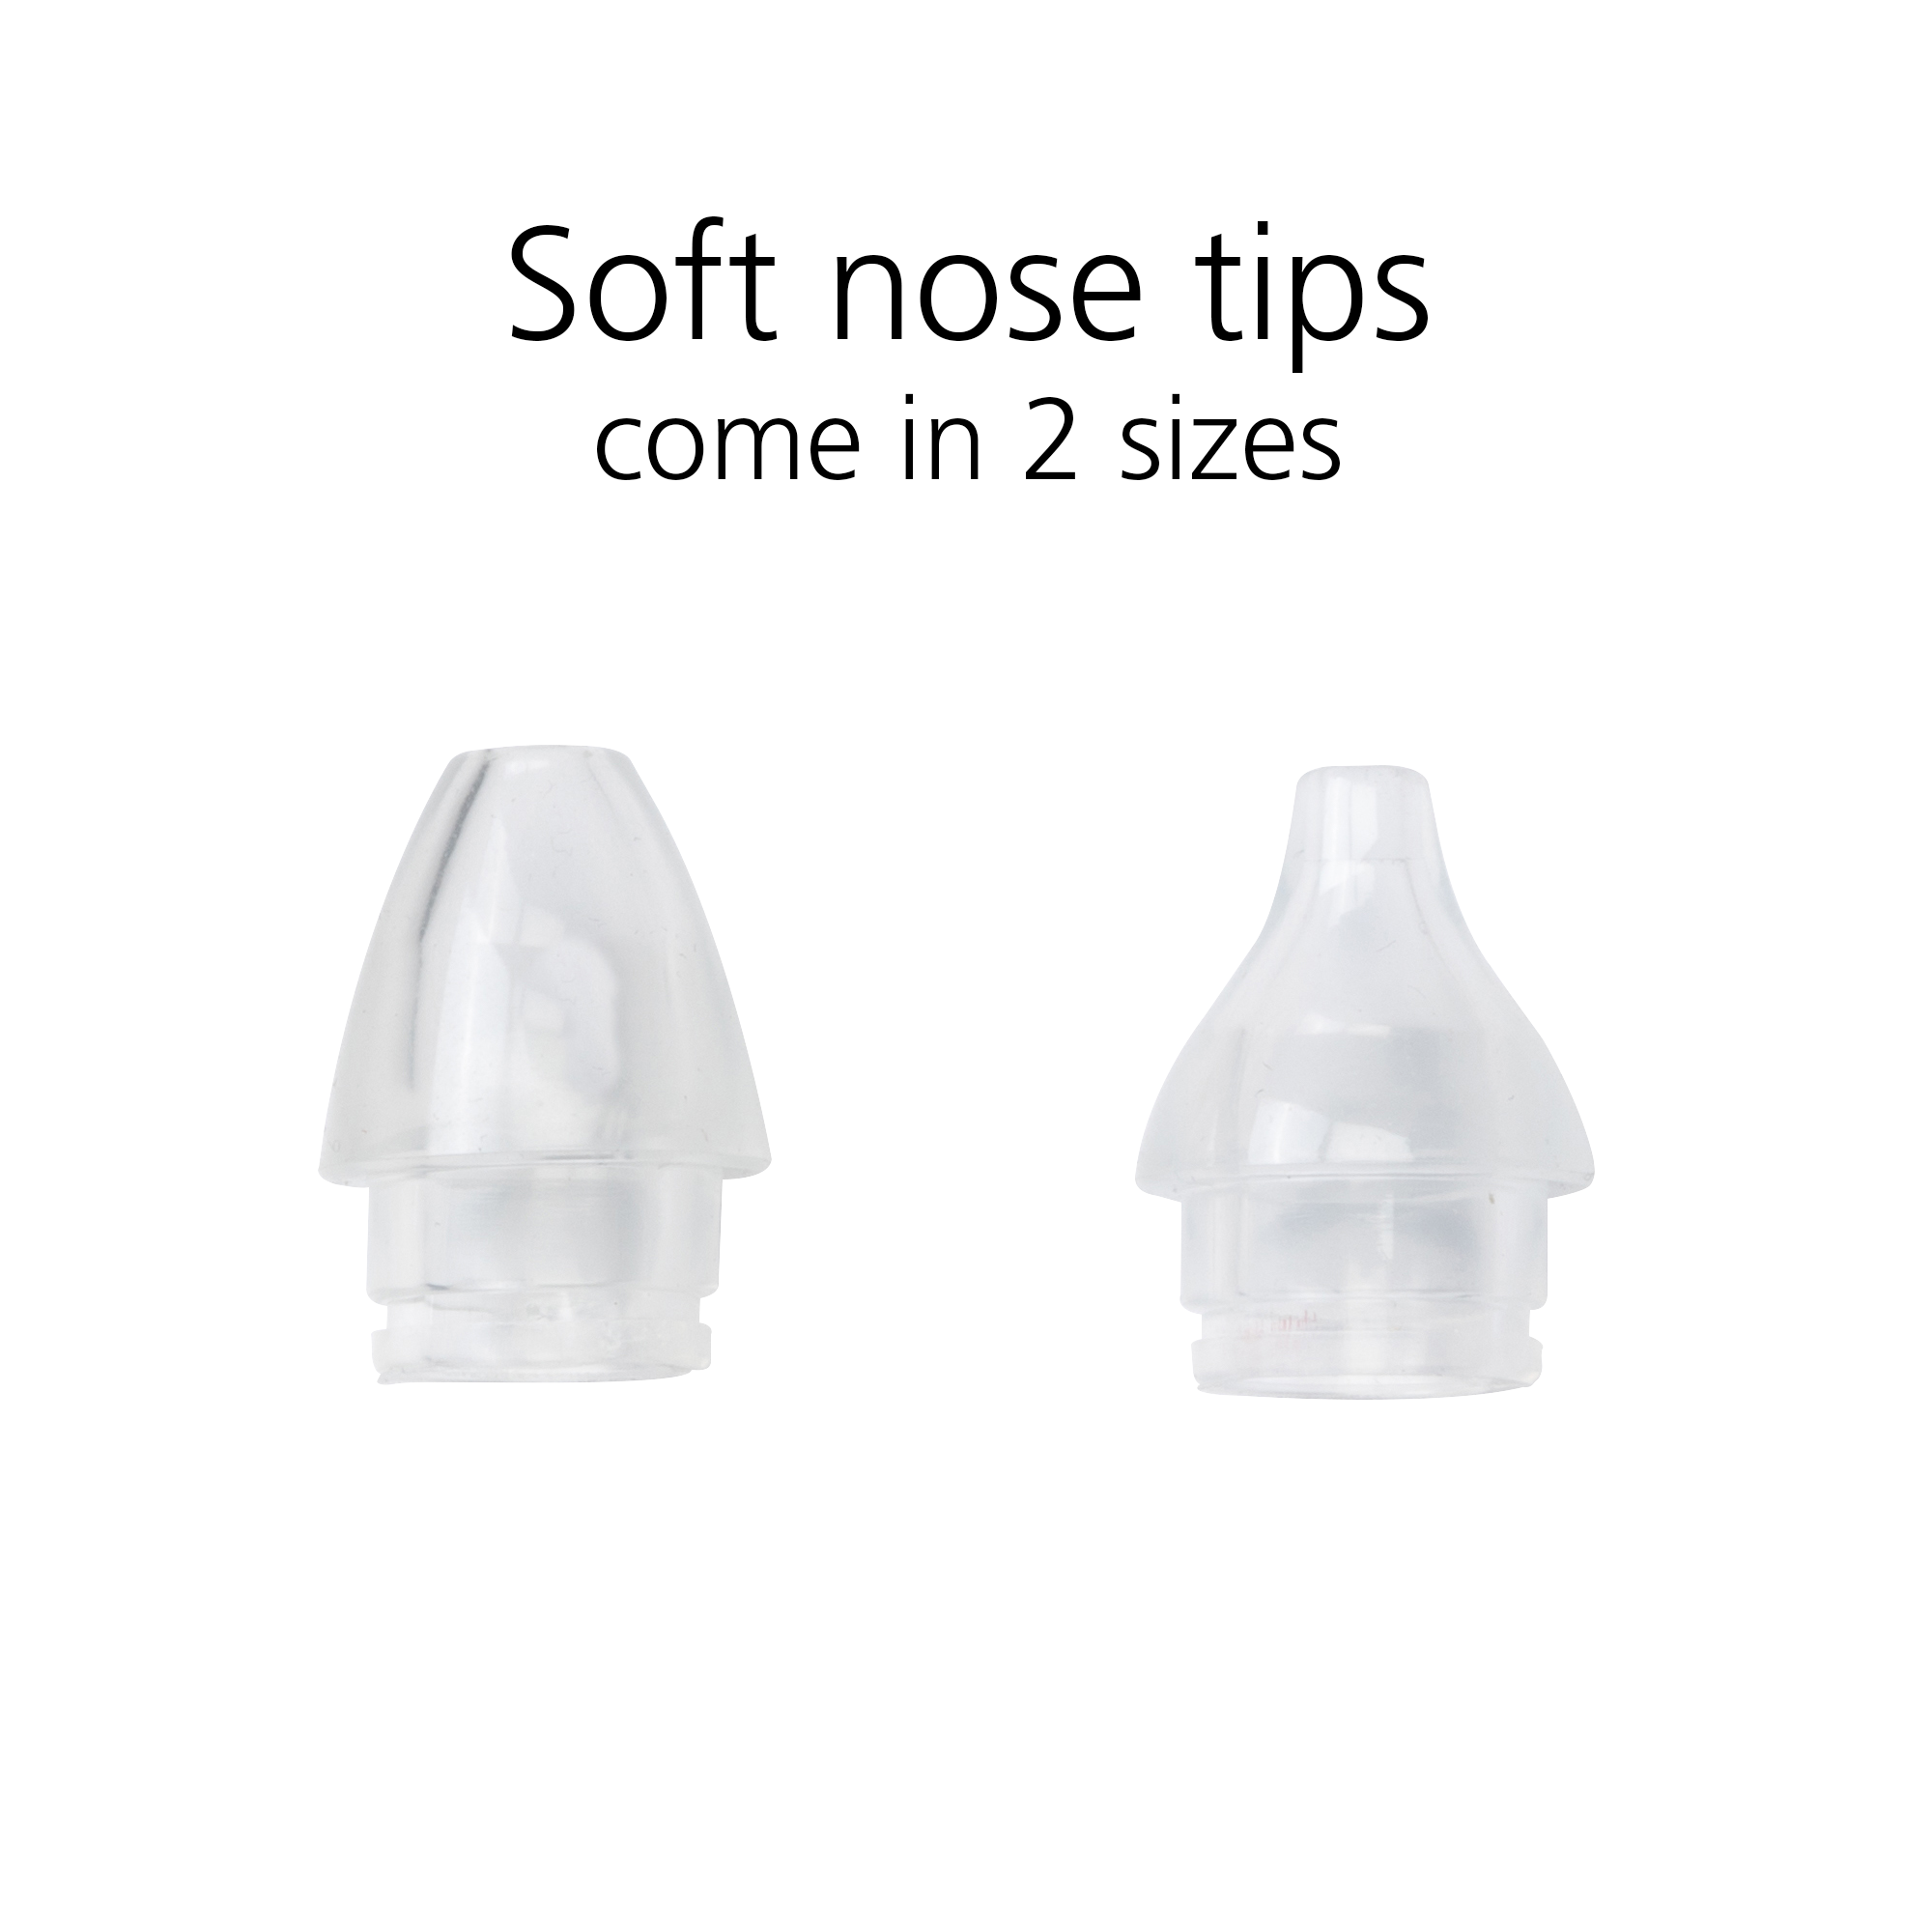 Soft nose tips come in 2 sizes